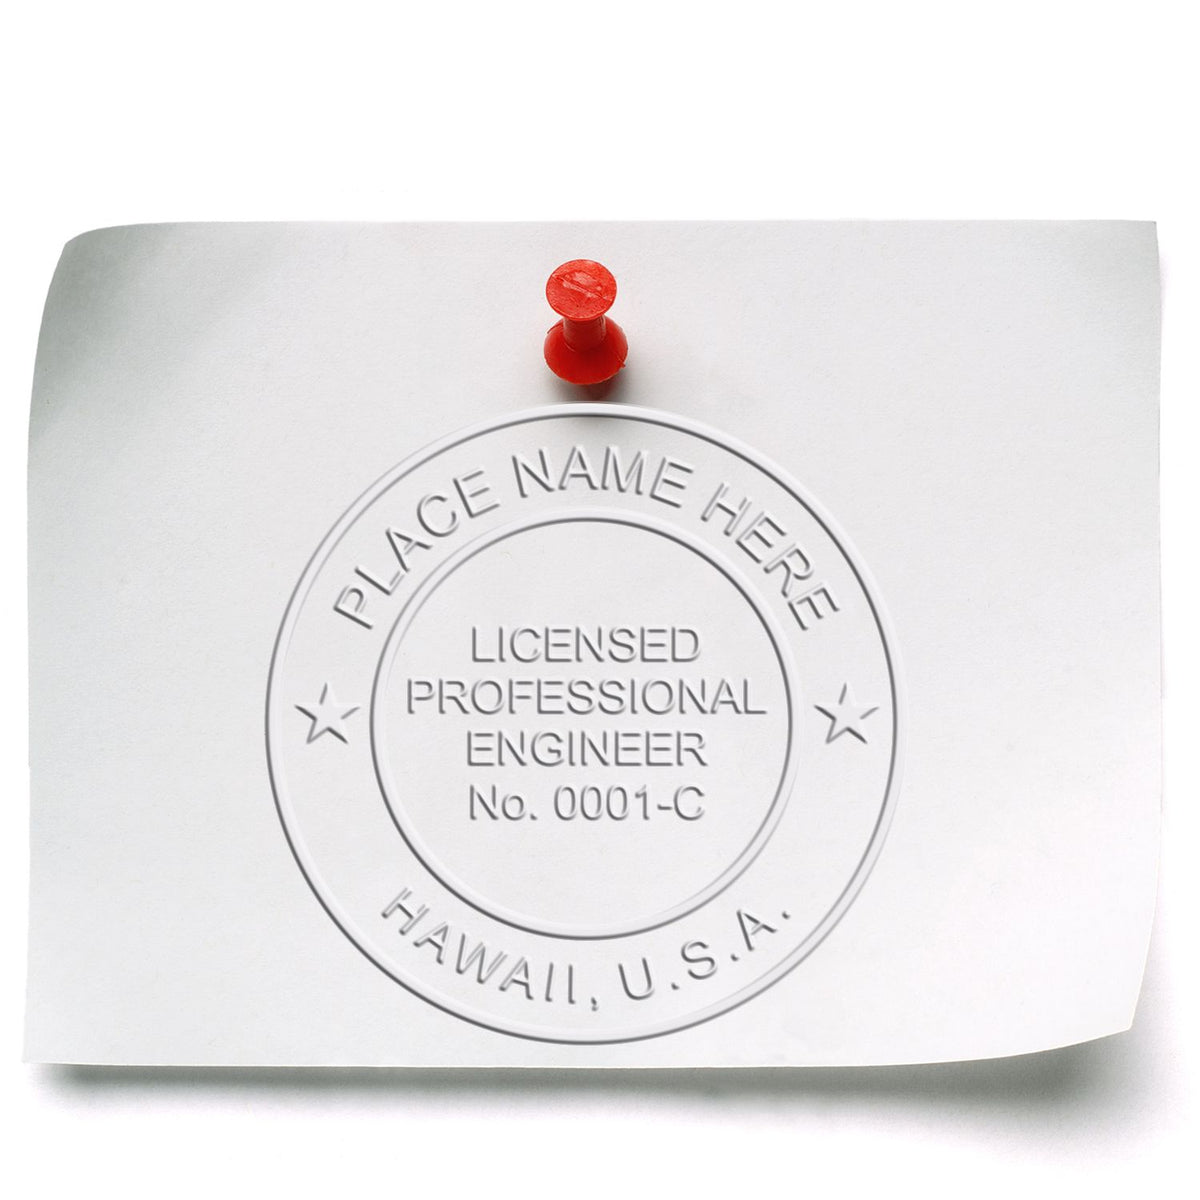 An in use photo of the Gift Hawaii Engineer Seal showing a sample imprint on a cardstock